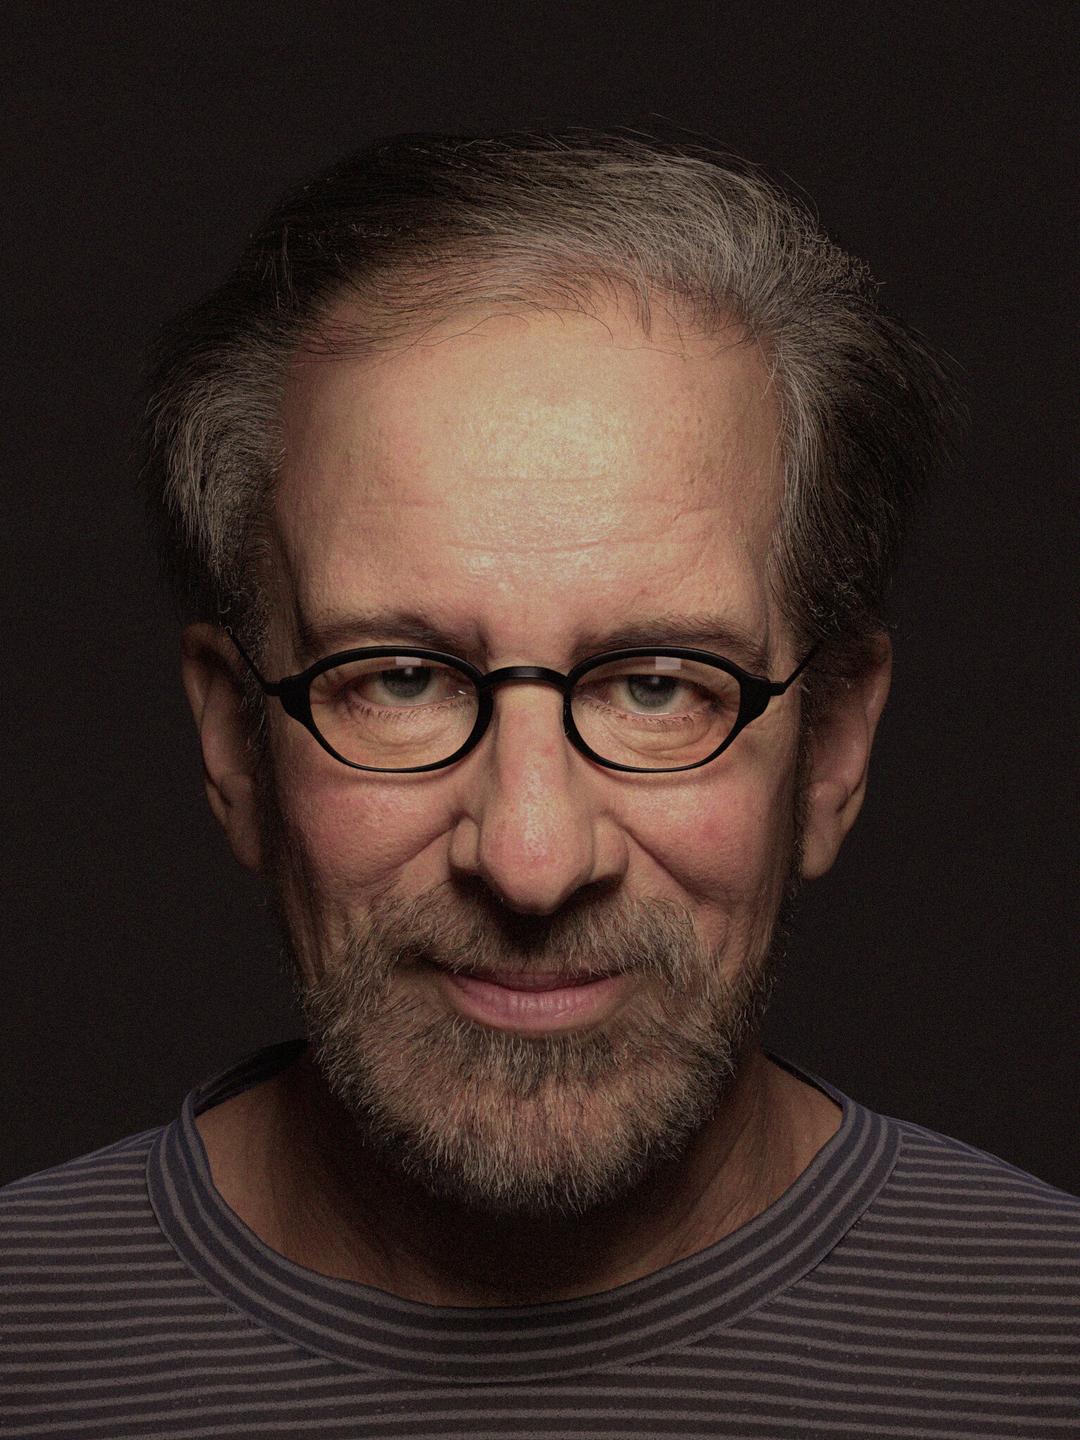 Steven Spielberg who is his mother